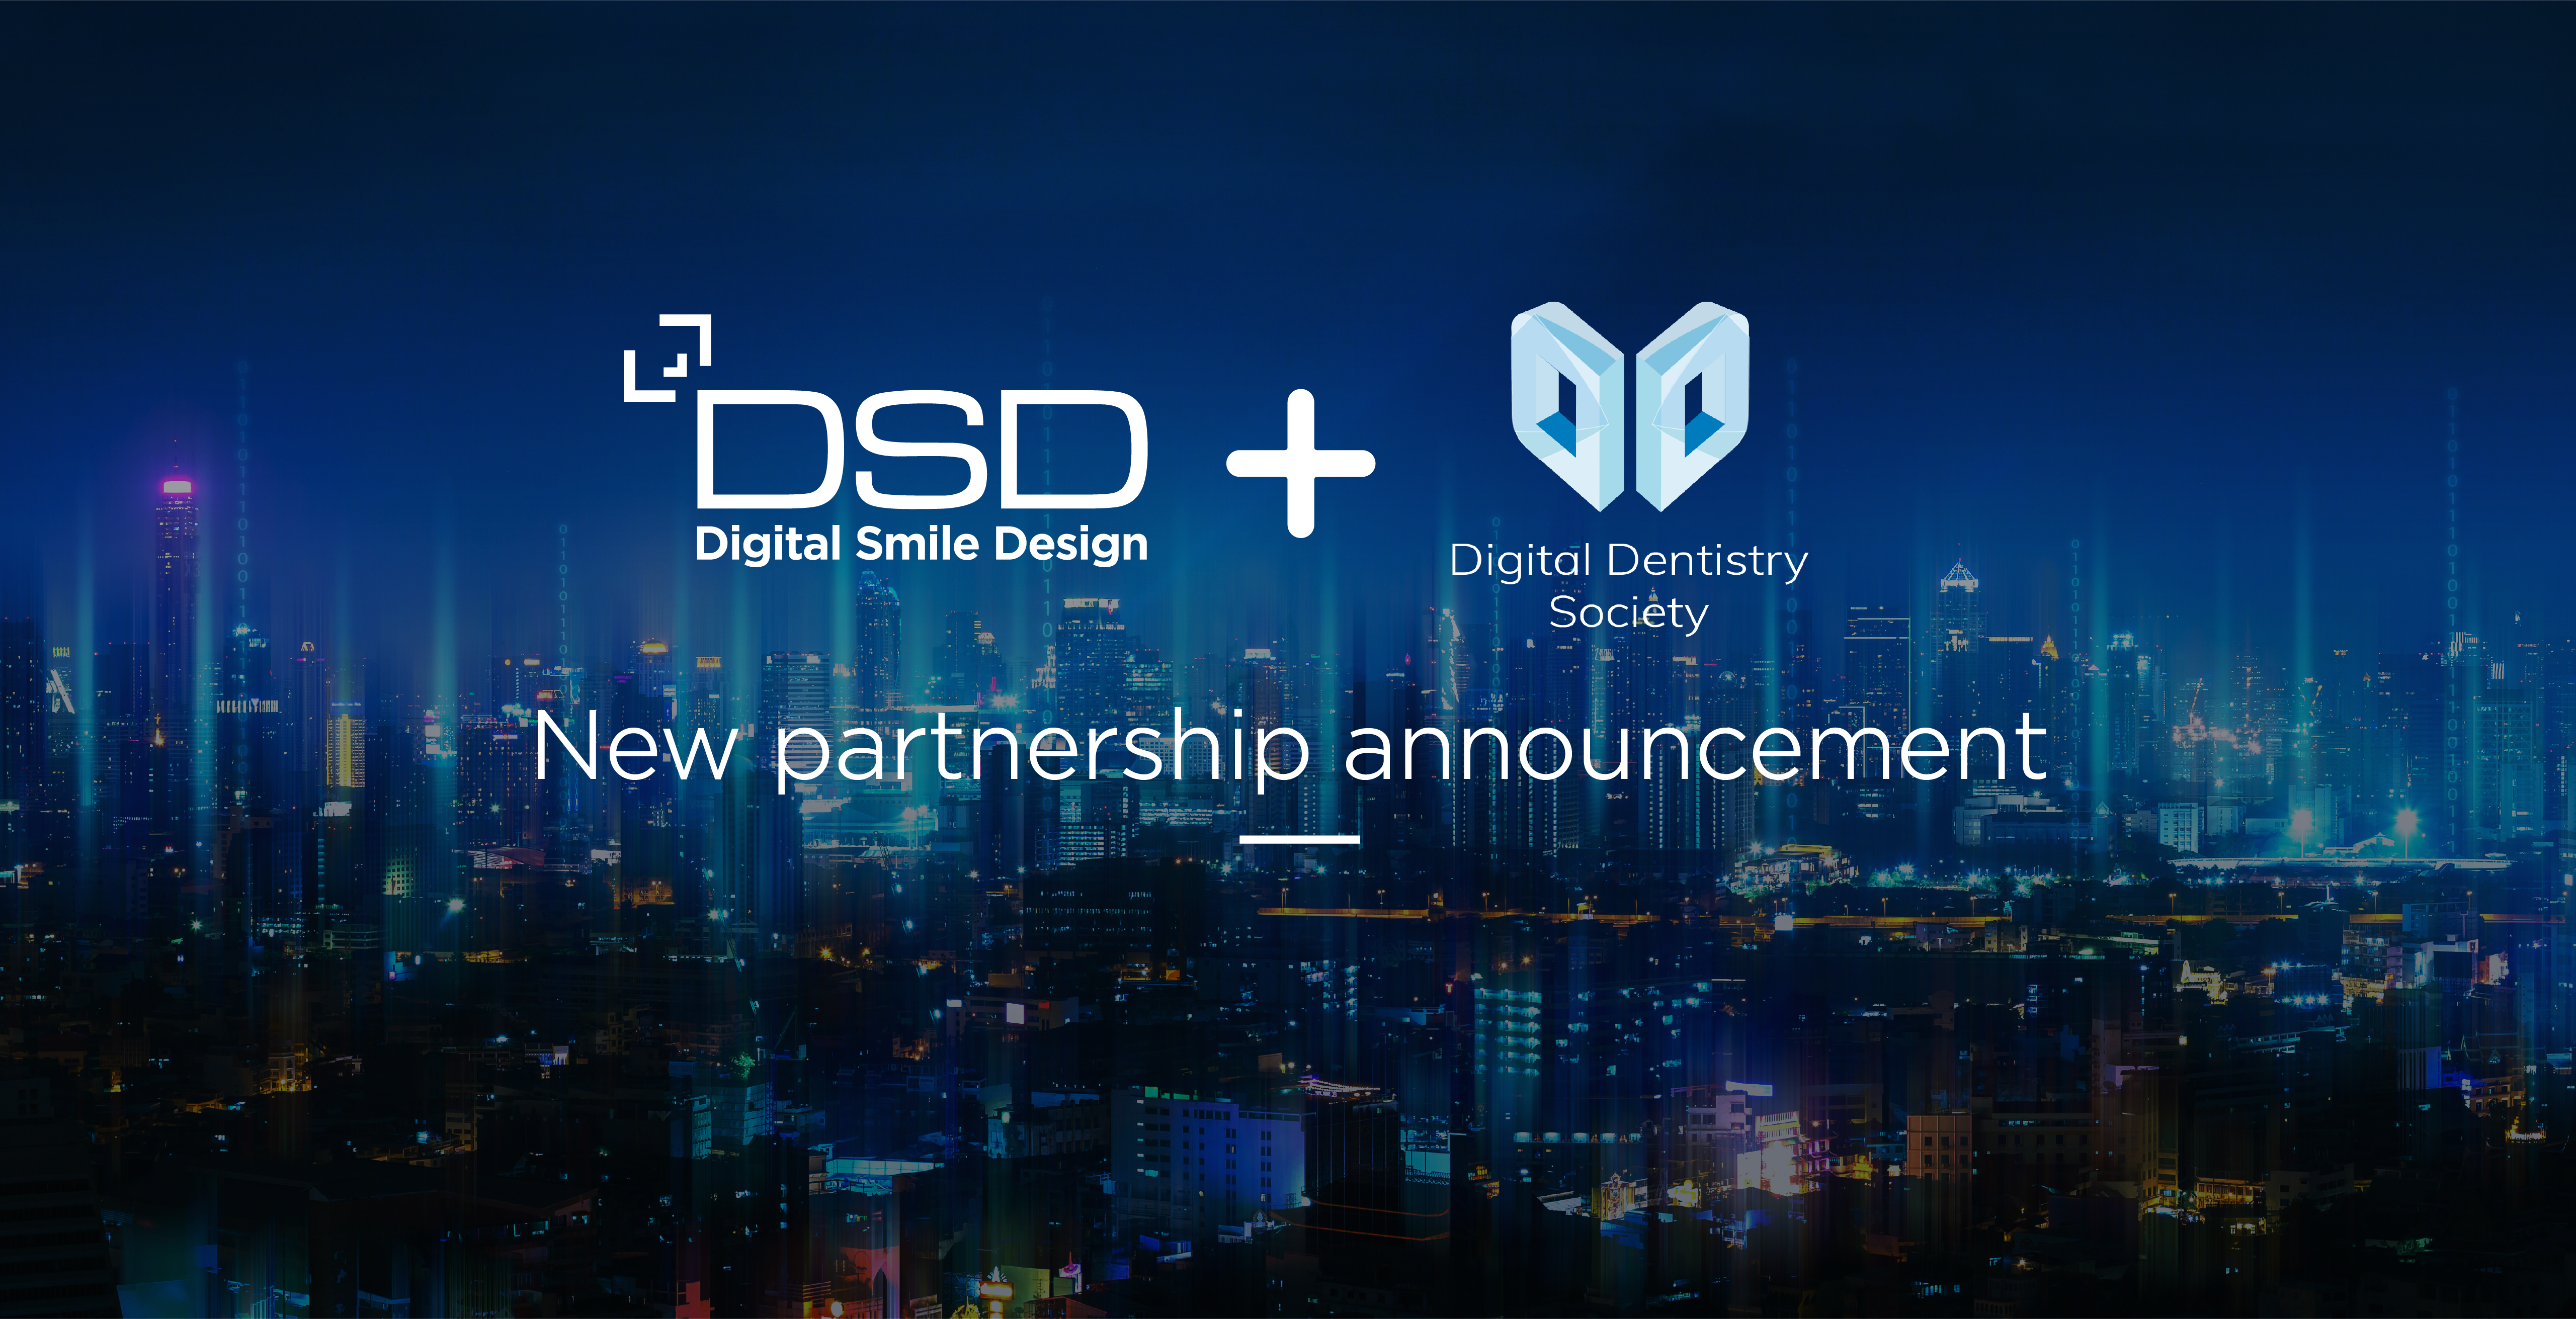 DSD joins forces with Digital Dentistry Society international